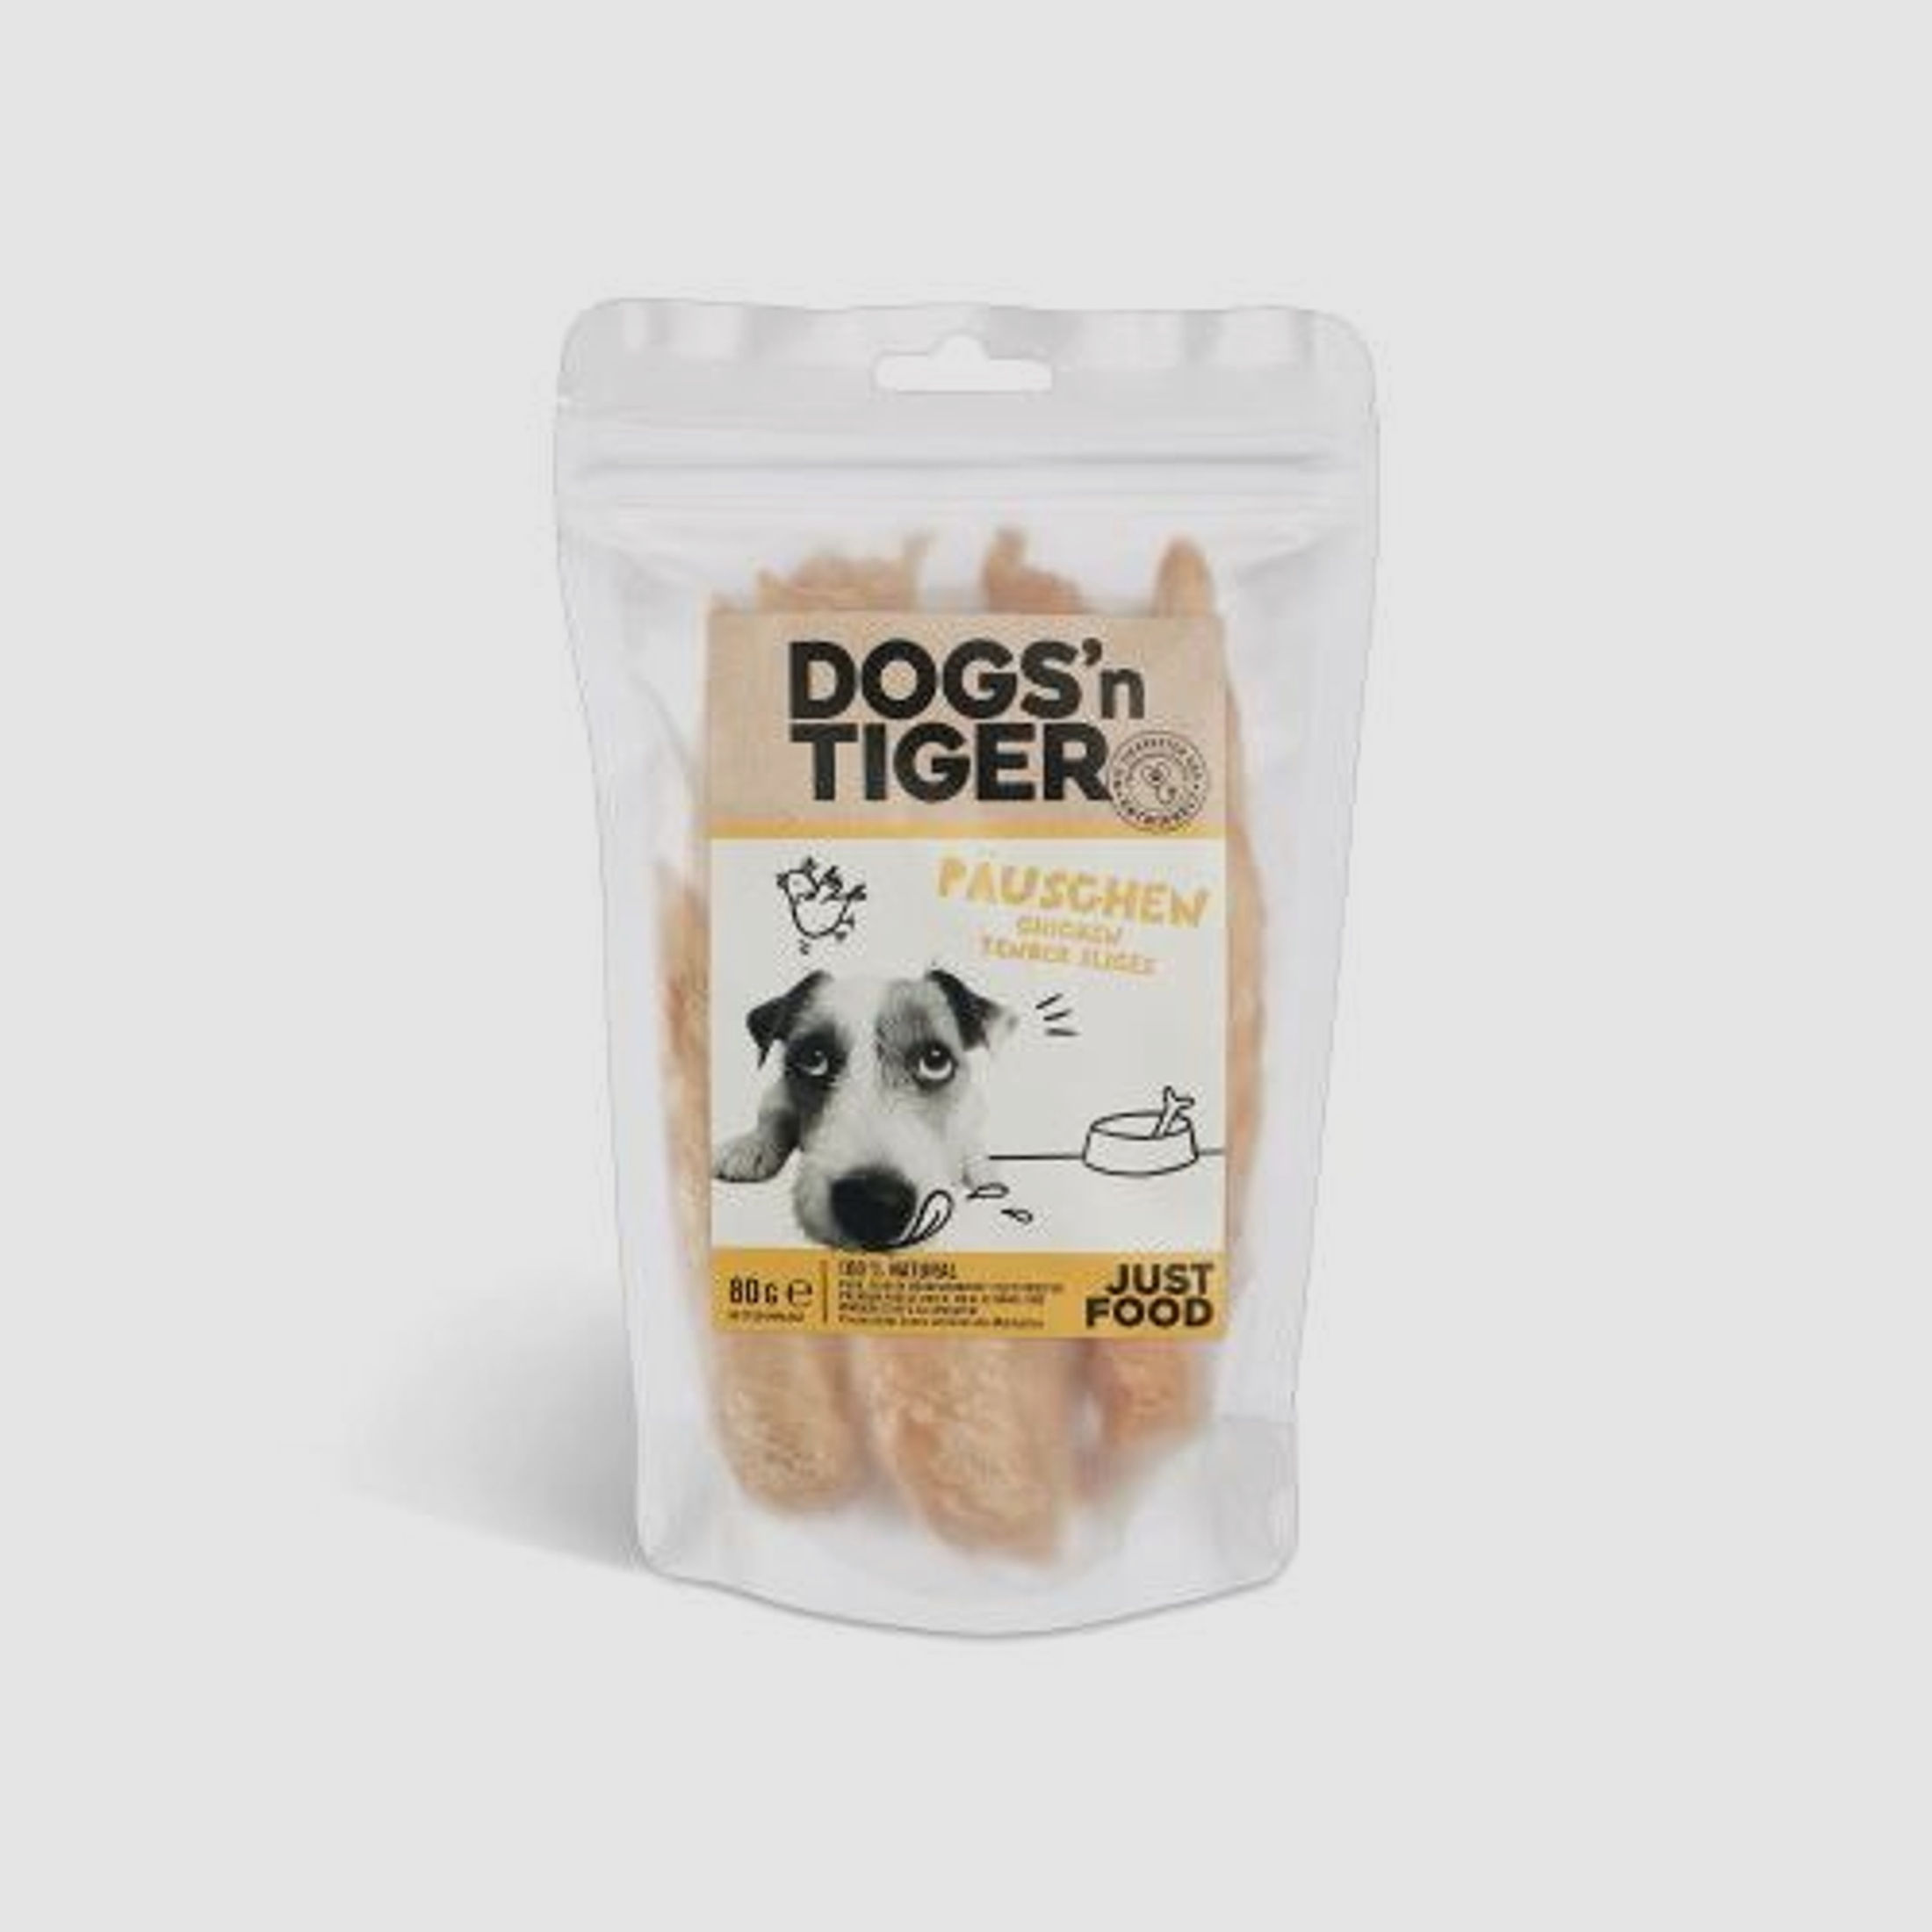 Dogs `n Tiger Hundesnack P?uschen Huhn 80g